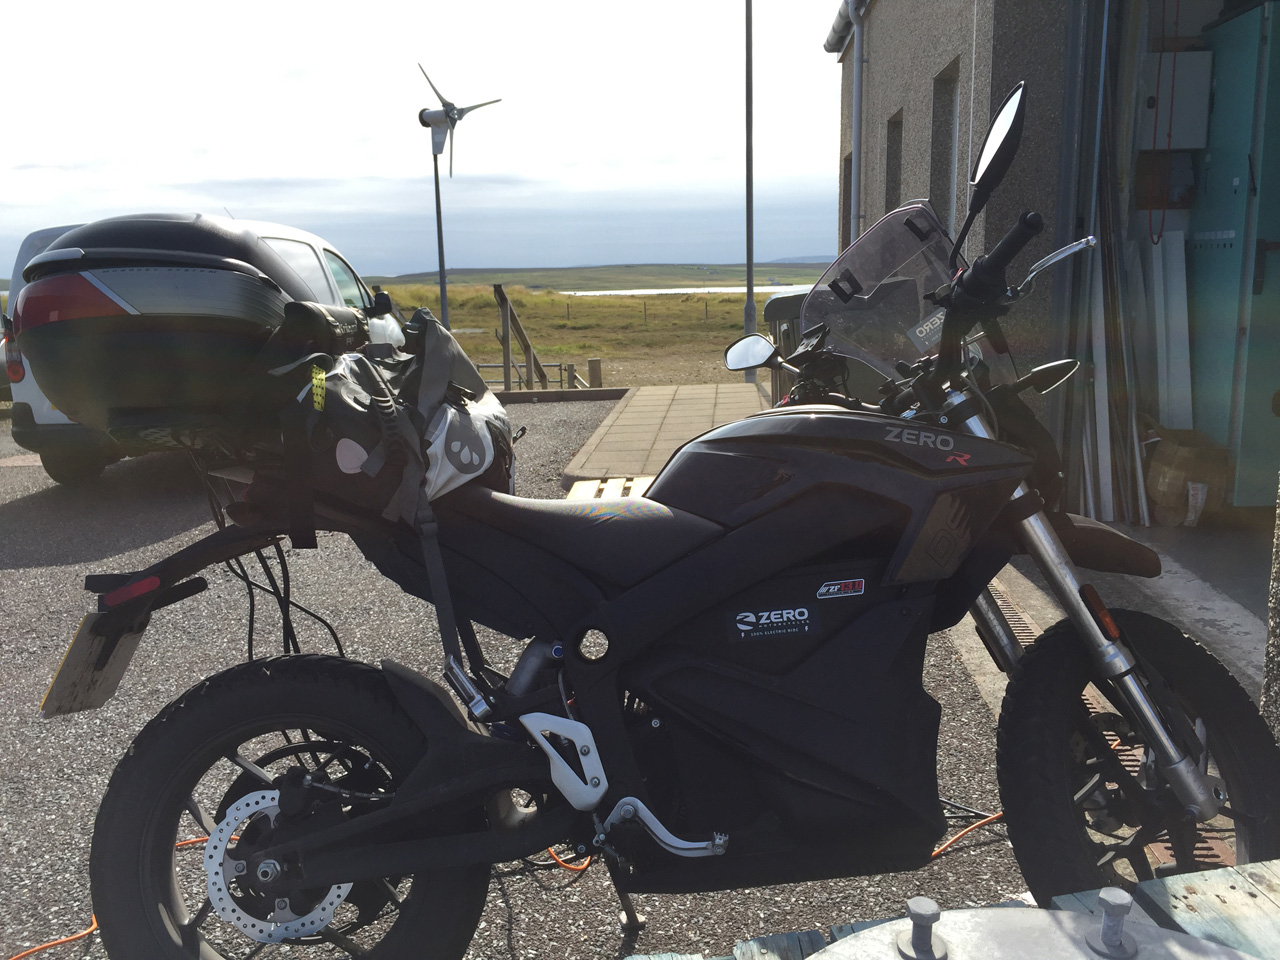 John Chivers' Zero DSR electric motorcycle charging at the Pure Energy Centre, Unst, Shetland.